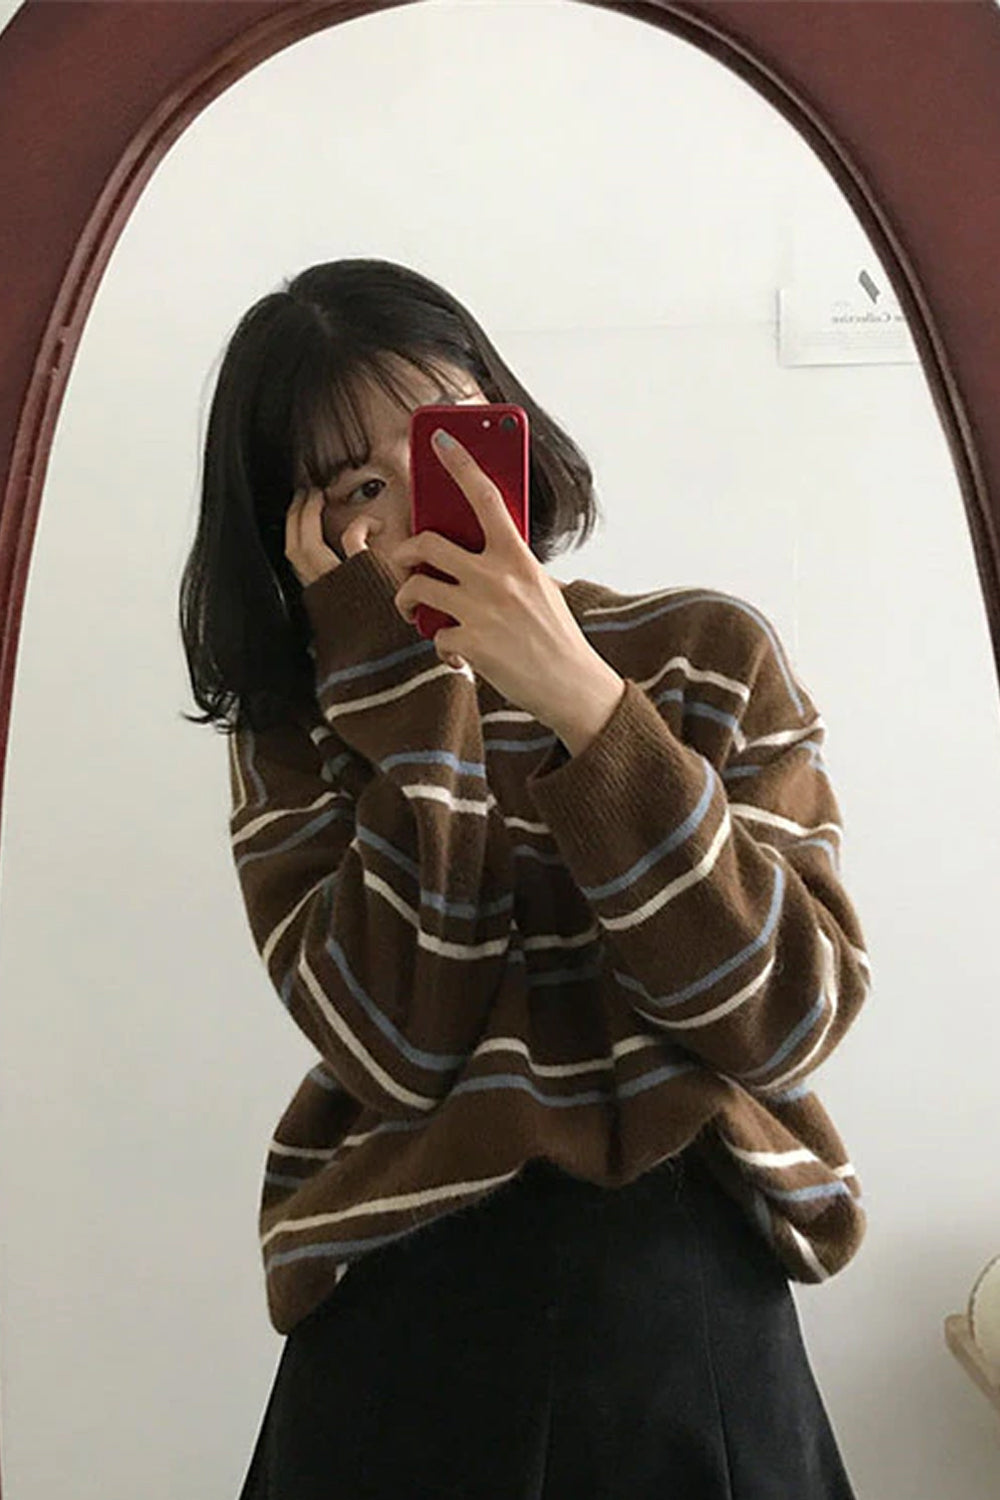 Retro O-Neck Striped Knitted Sweater